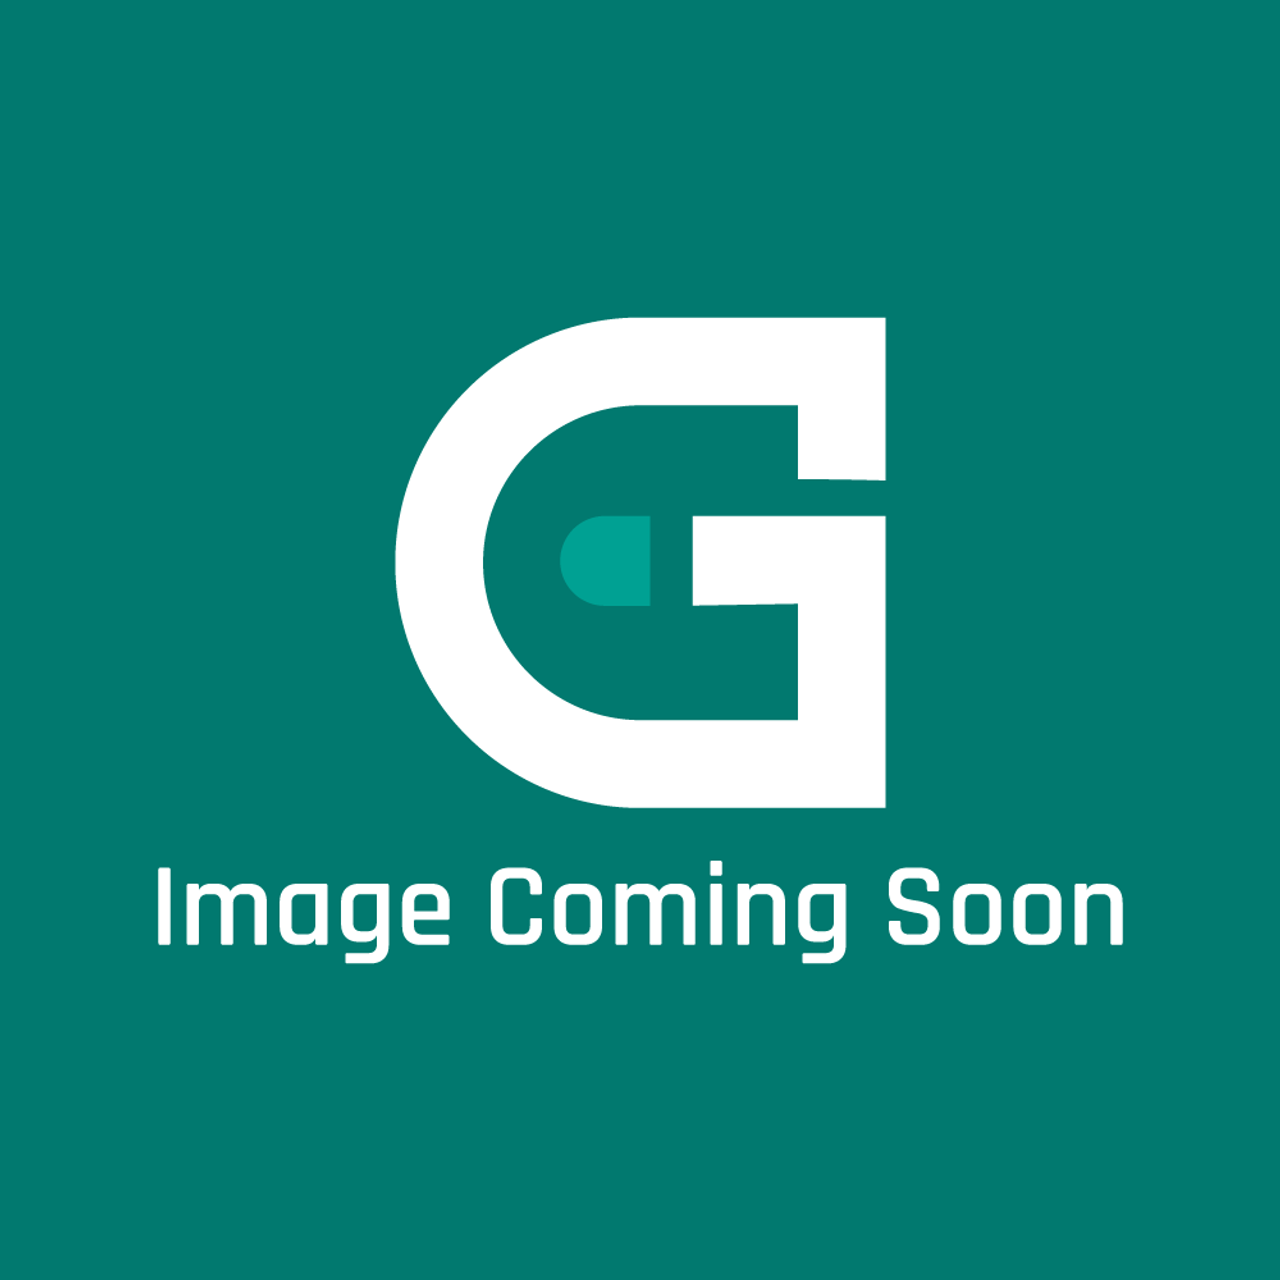 AGA Marvel FS4M997723 - Q00744Axx-Stay Rod Prot Plate - Image Coming Soon!